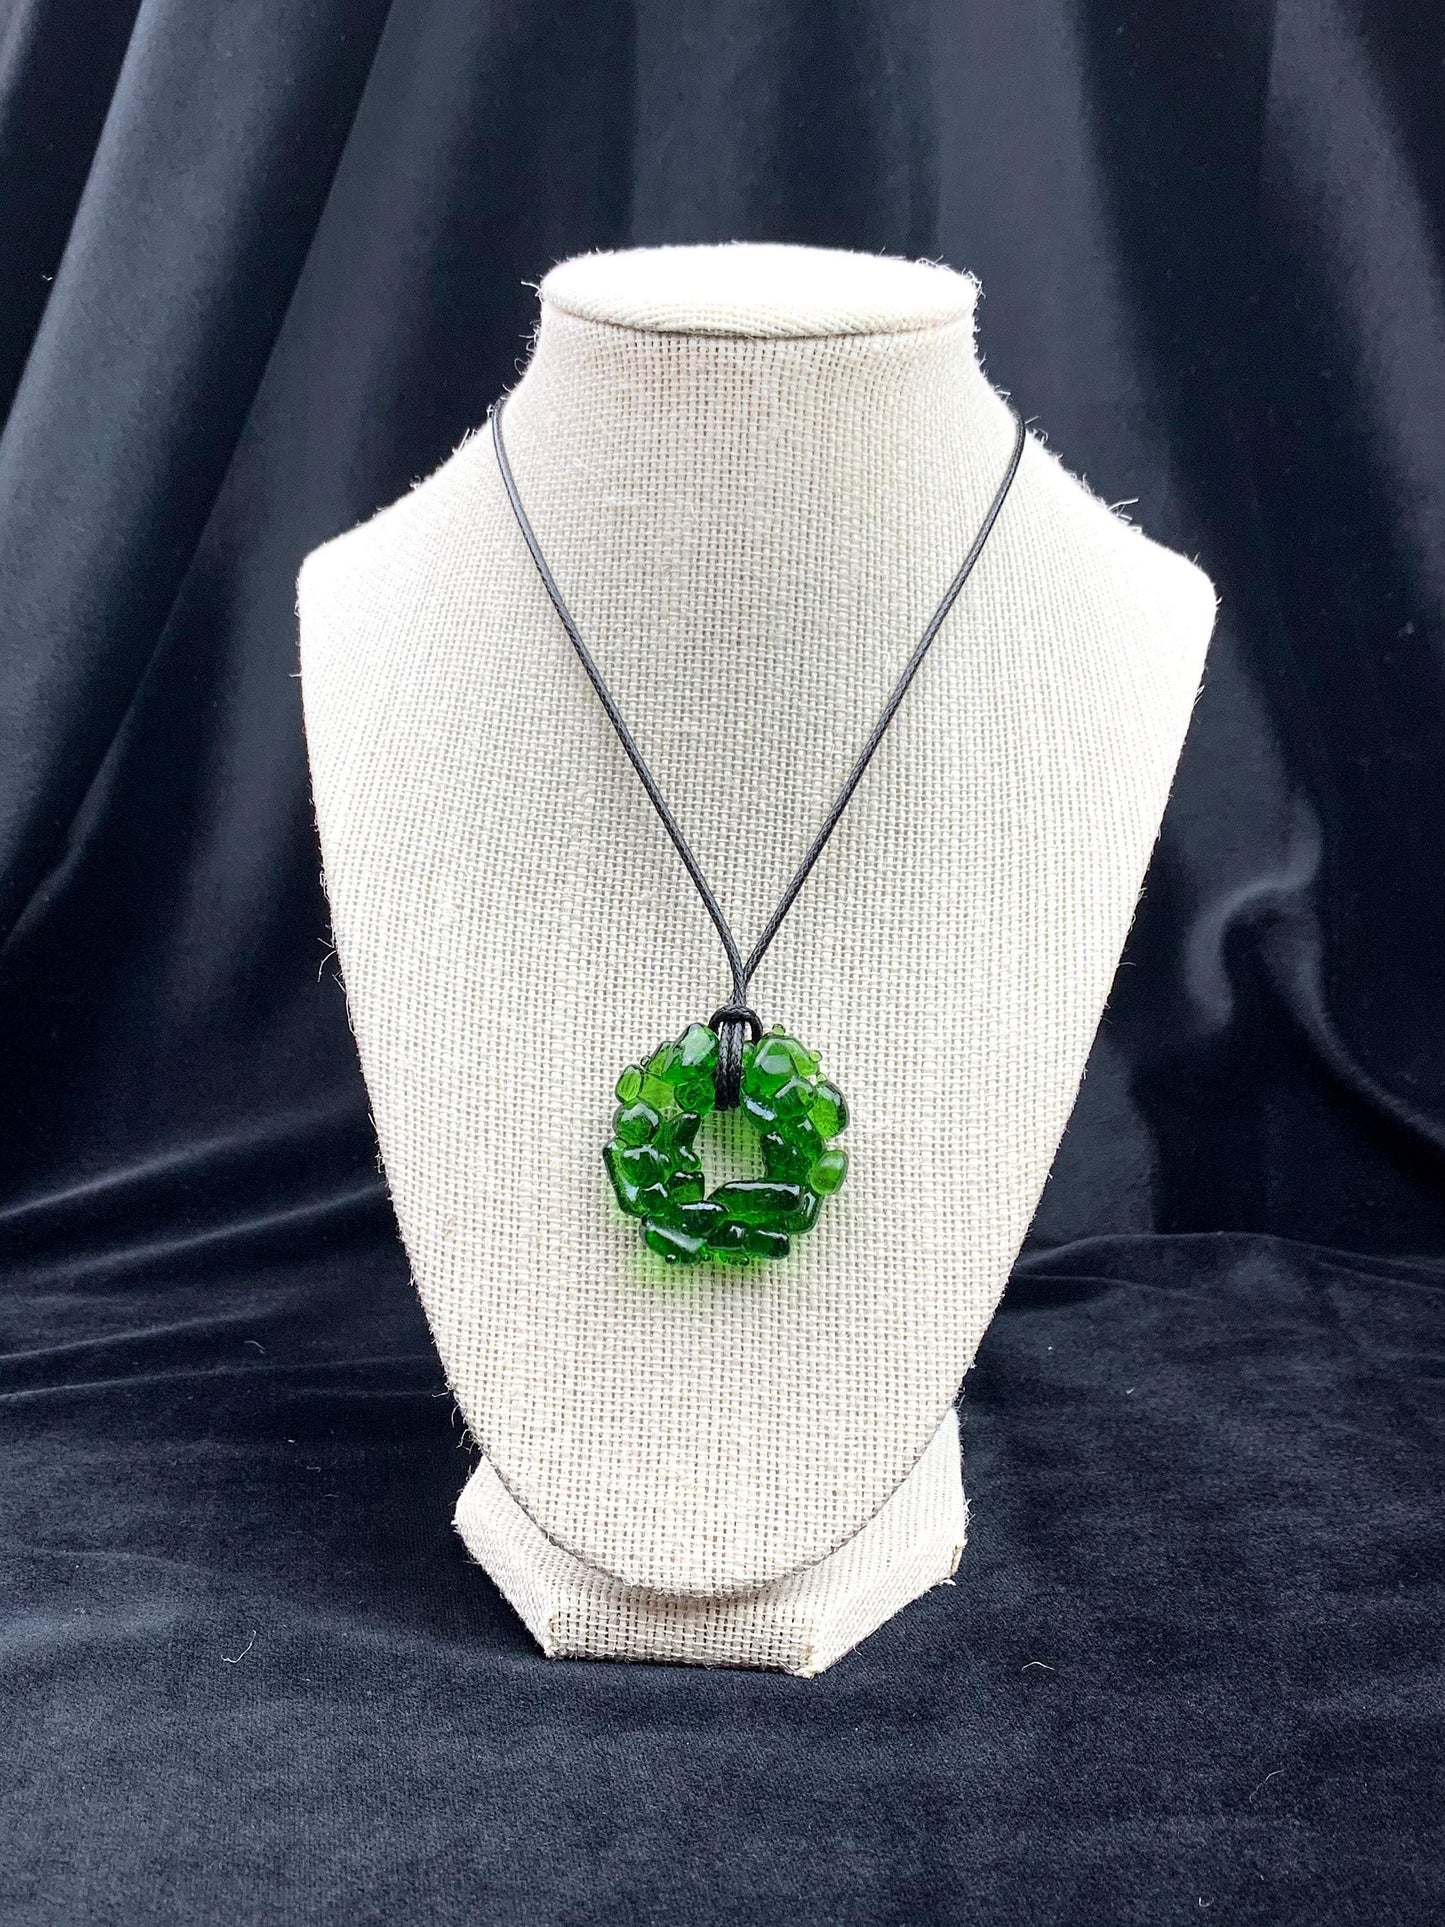 Upcycled Wine Bottle Jewelry, Green Statement Pendant Necklace, Recycled Glass, Gift for Wine Lover, Glass Bottle Art